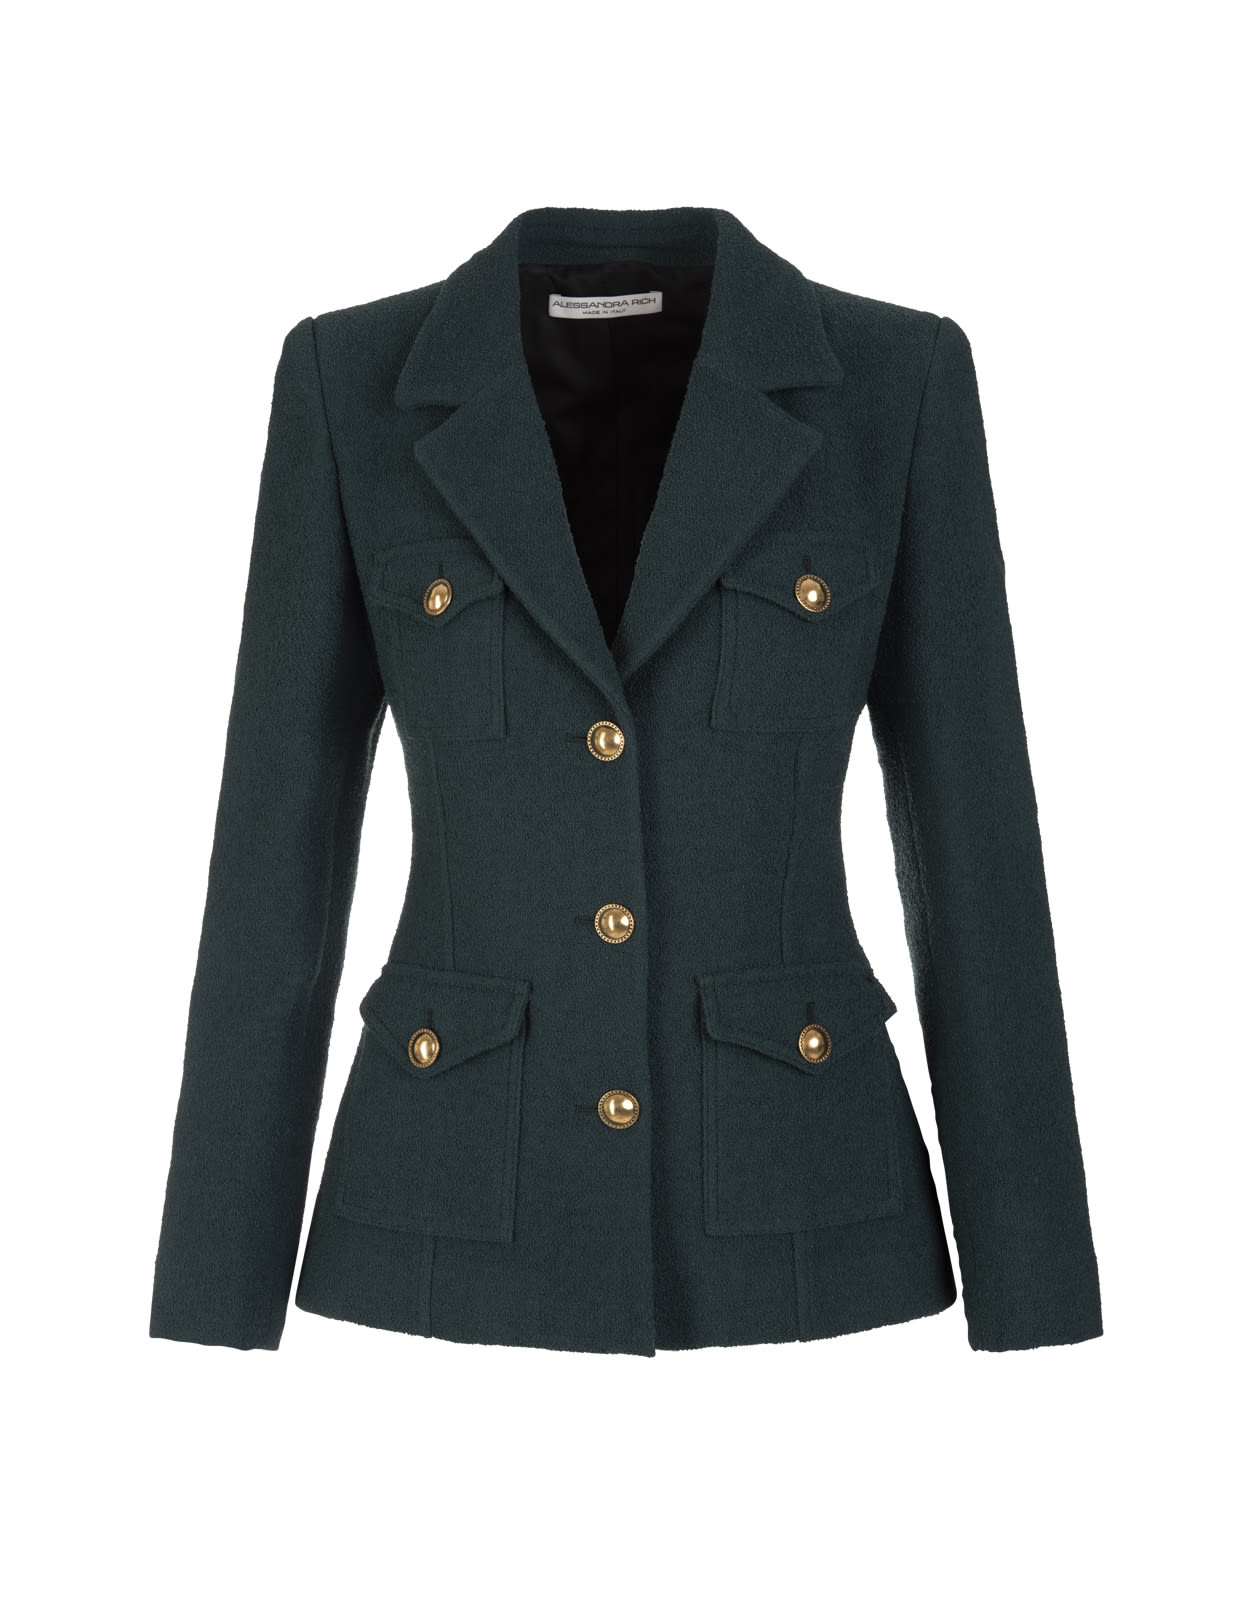 Alessandra Rich Woman Single Breasted Jacket In Green Tweed Boucle